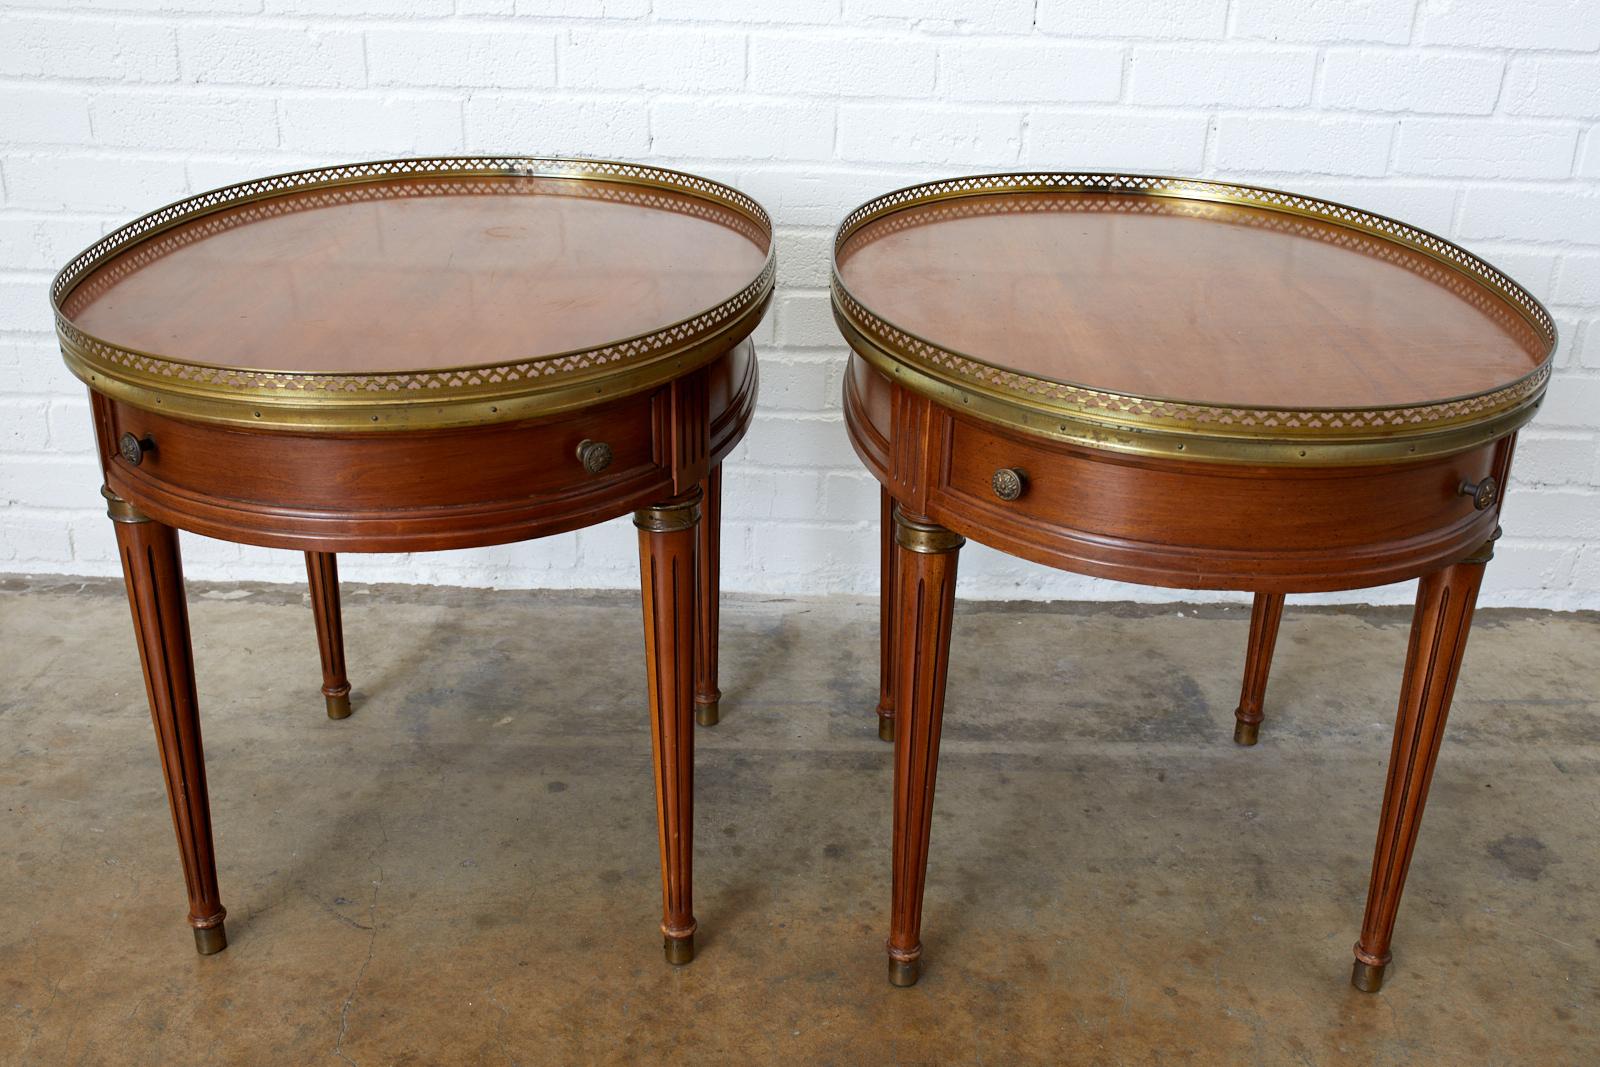 20th Century Pair of French Louis XVI Style Oval Bouillotte Tables